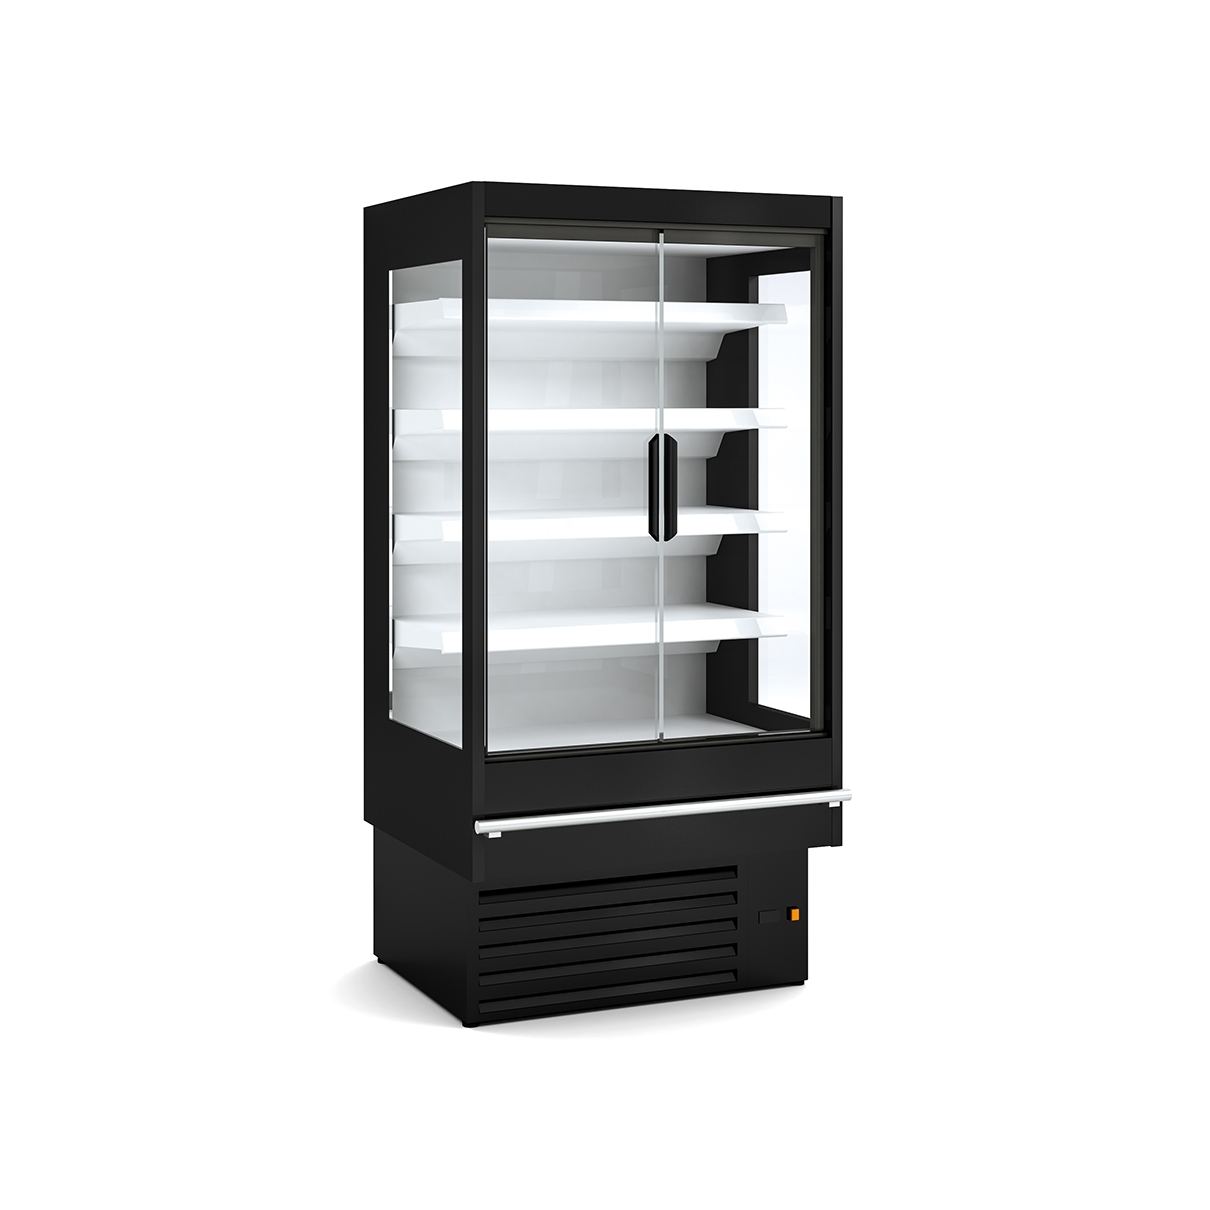 REFRIGERATED WALL-MOUNTED DISPLAY CABINET HDG3 M1